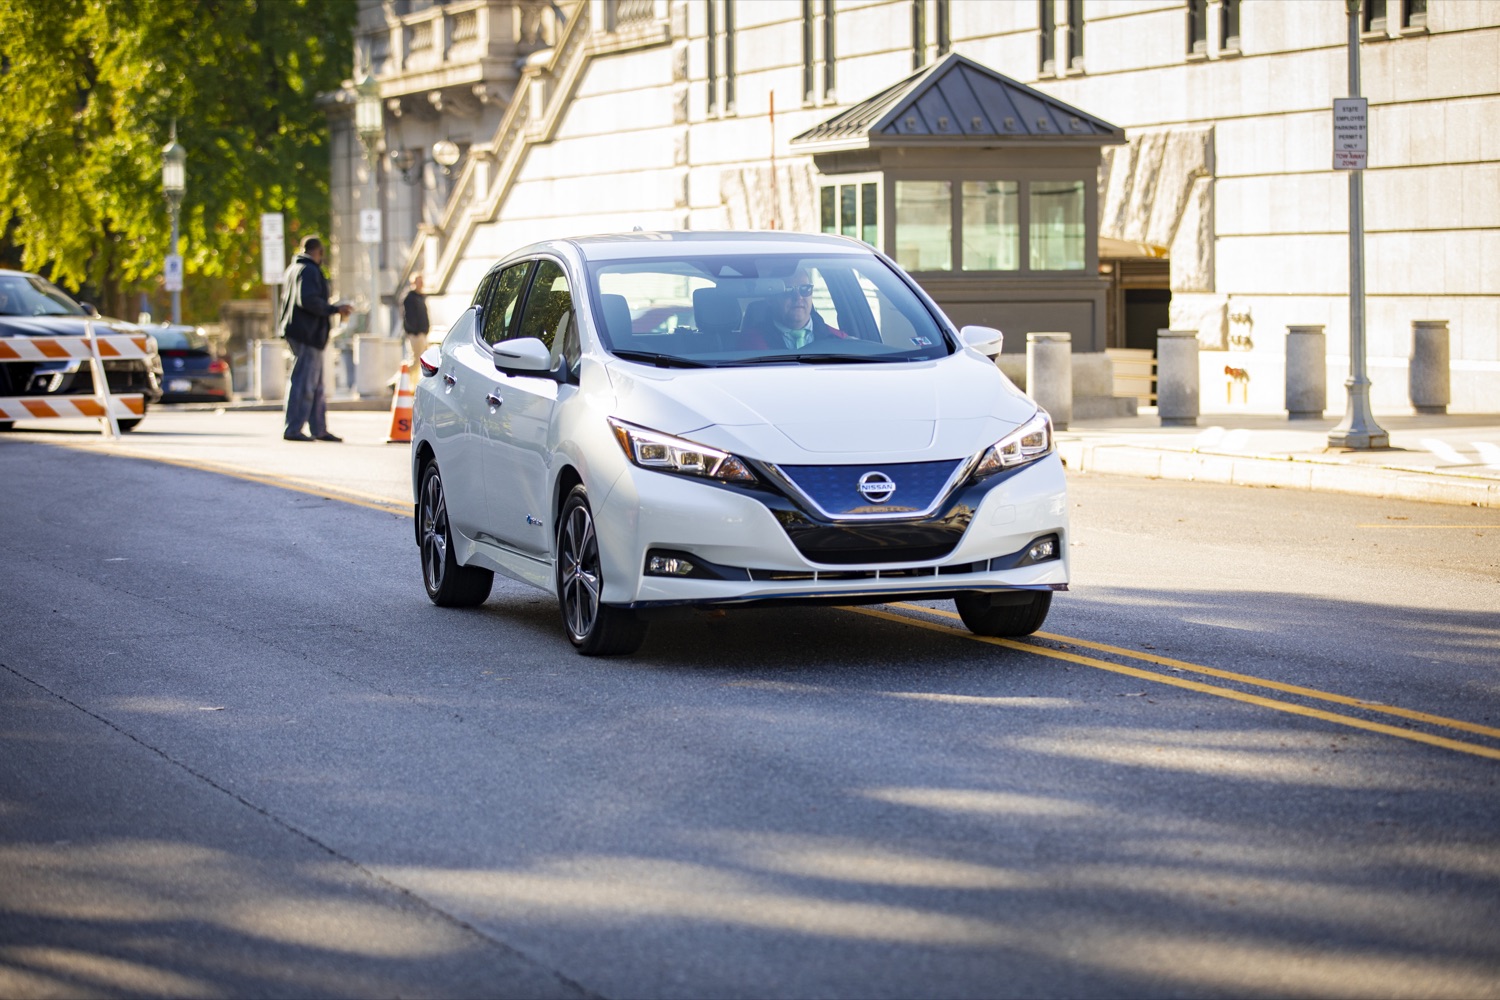 Members of the public are invited to test out electric and hybrid vehicles during a Ride & Drive Event at the Capitol Complex on October 23, 2019.<br><a href="https://filesource.amperwave.net/commonwealthofpa/photo/17449_DGS_DRIVE_ELECTRIC_CZ_10.JPG" target="_blank">⇣ Download Photo</a>